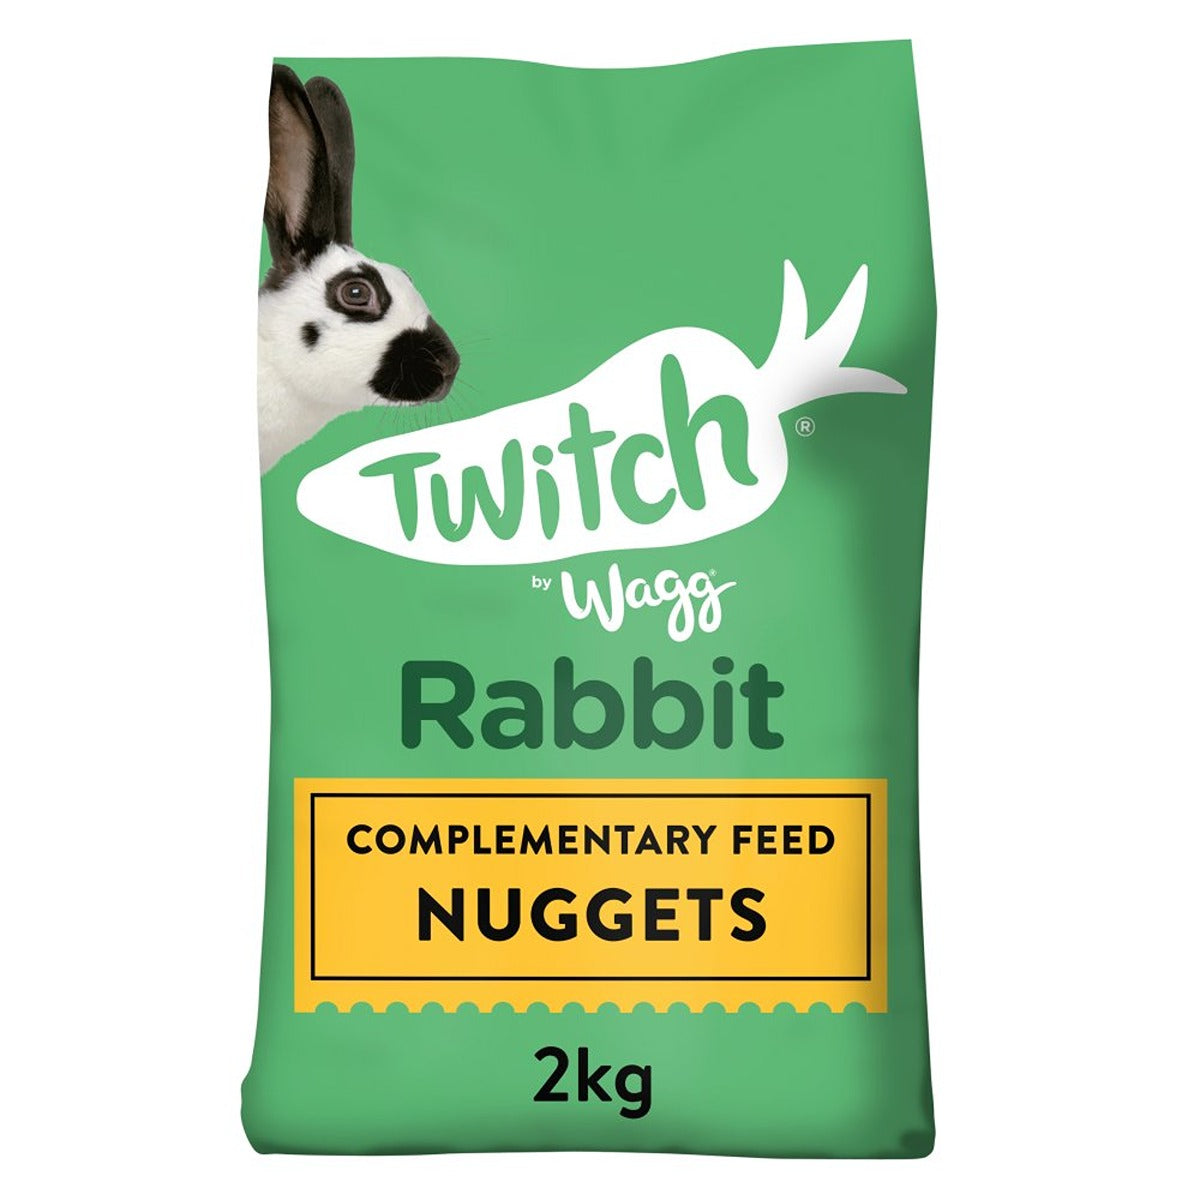 Wagg - Twitch Rabbit Nuggets - 2kg - Continental Food Store